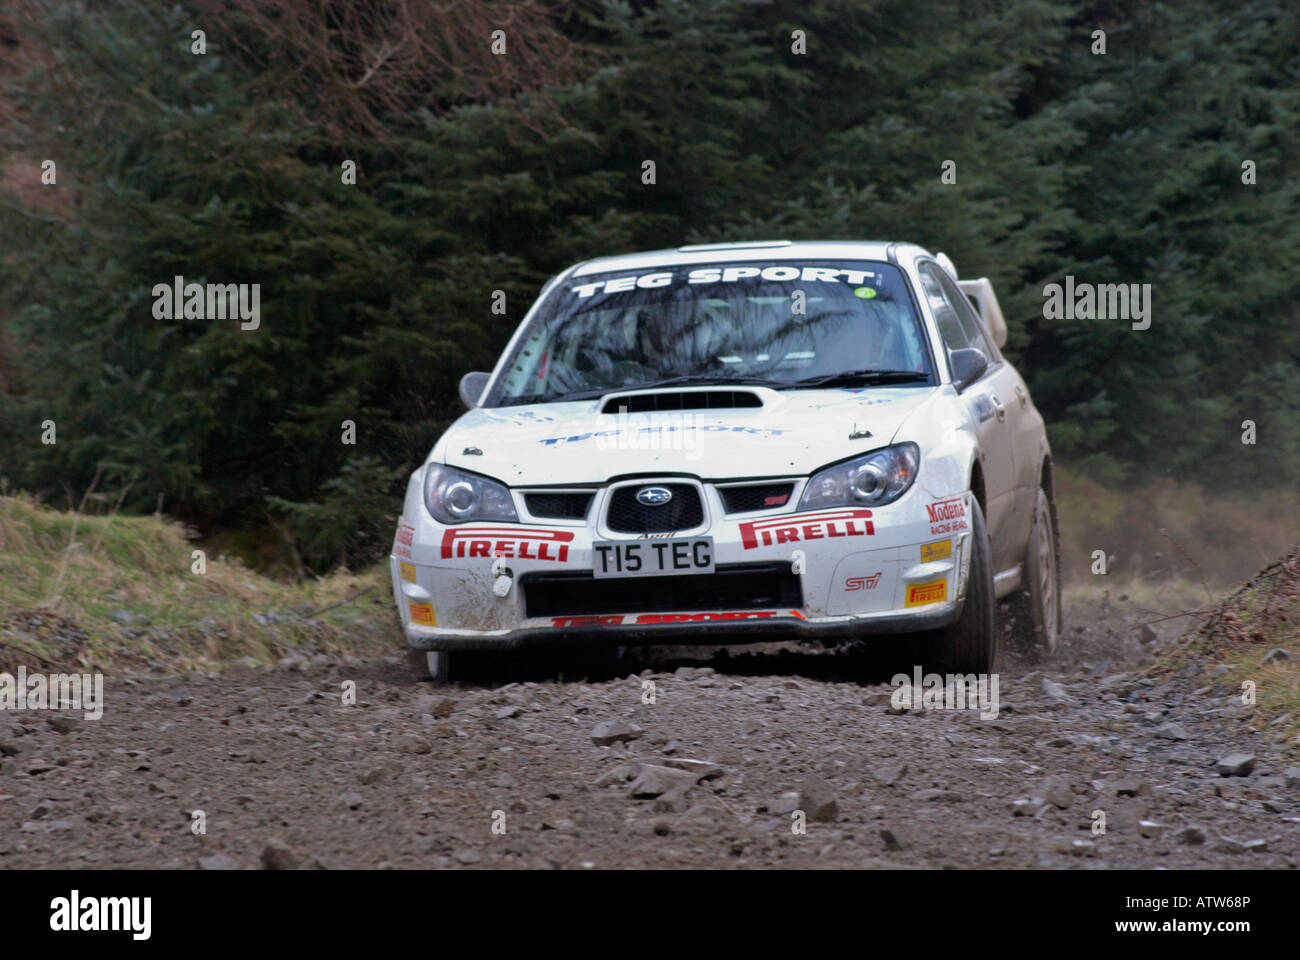 Rally Car on a special forest stage of a motor sport rally Stock Photo